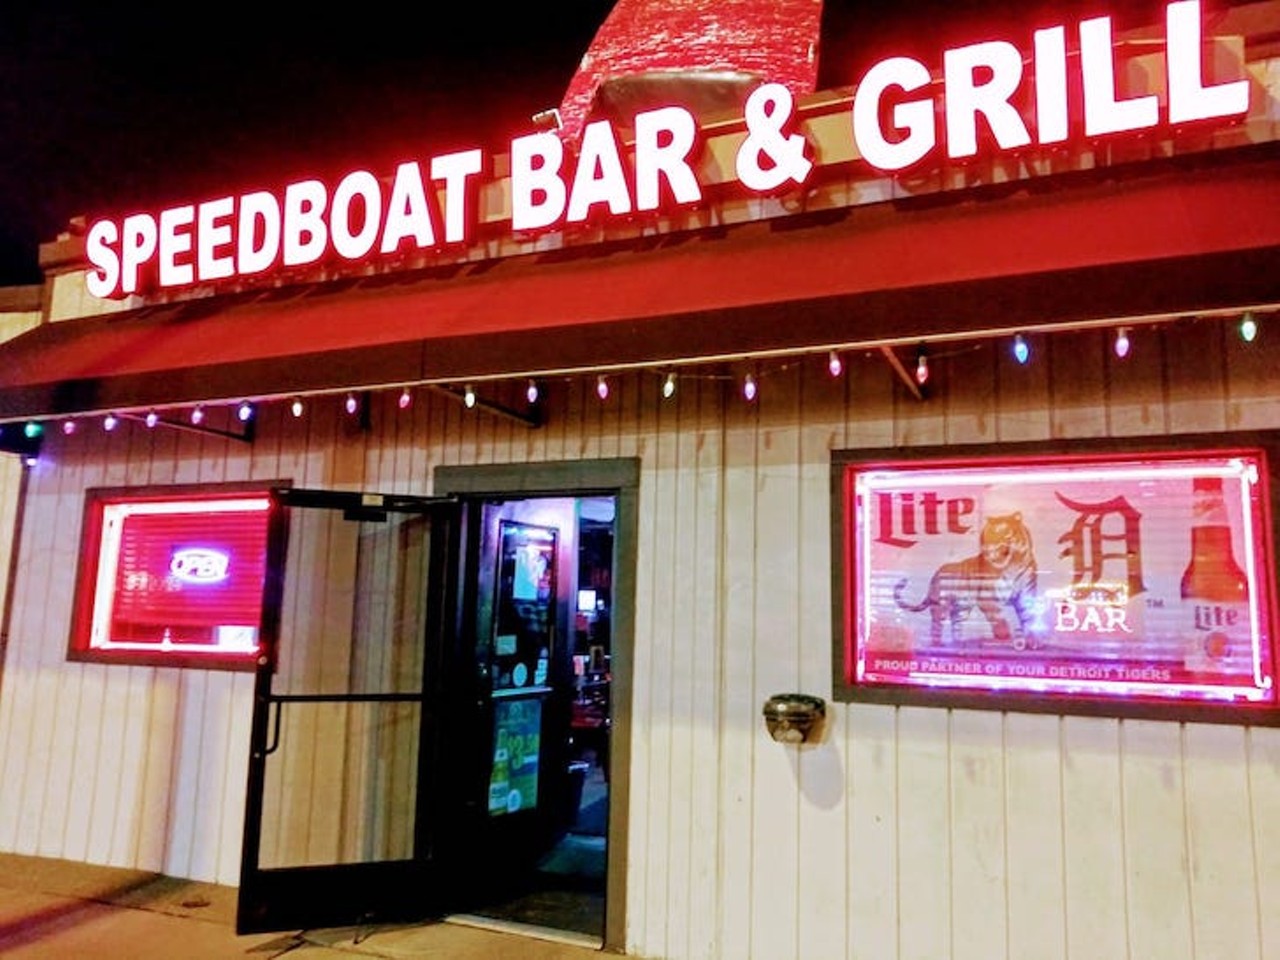 Speedboat Bar & Grill
749 Biddle Ave., Wyandotte; 734-282-5750
If you’re looking for a good bar burger, definitely visit Speedboat Bar & Grill.